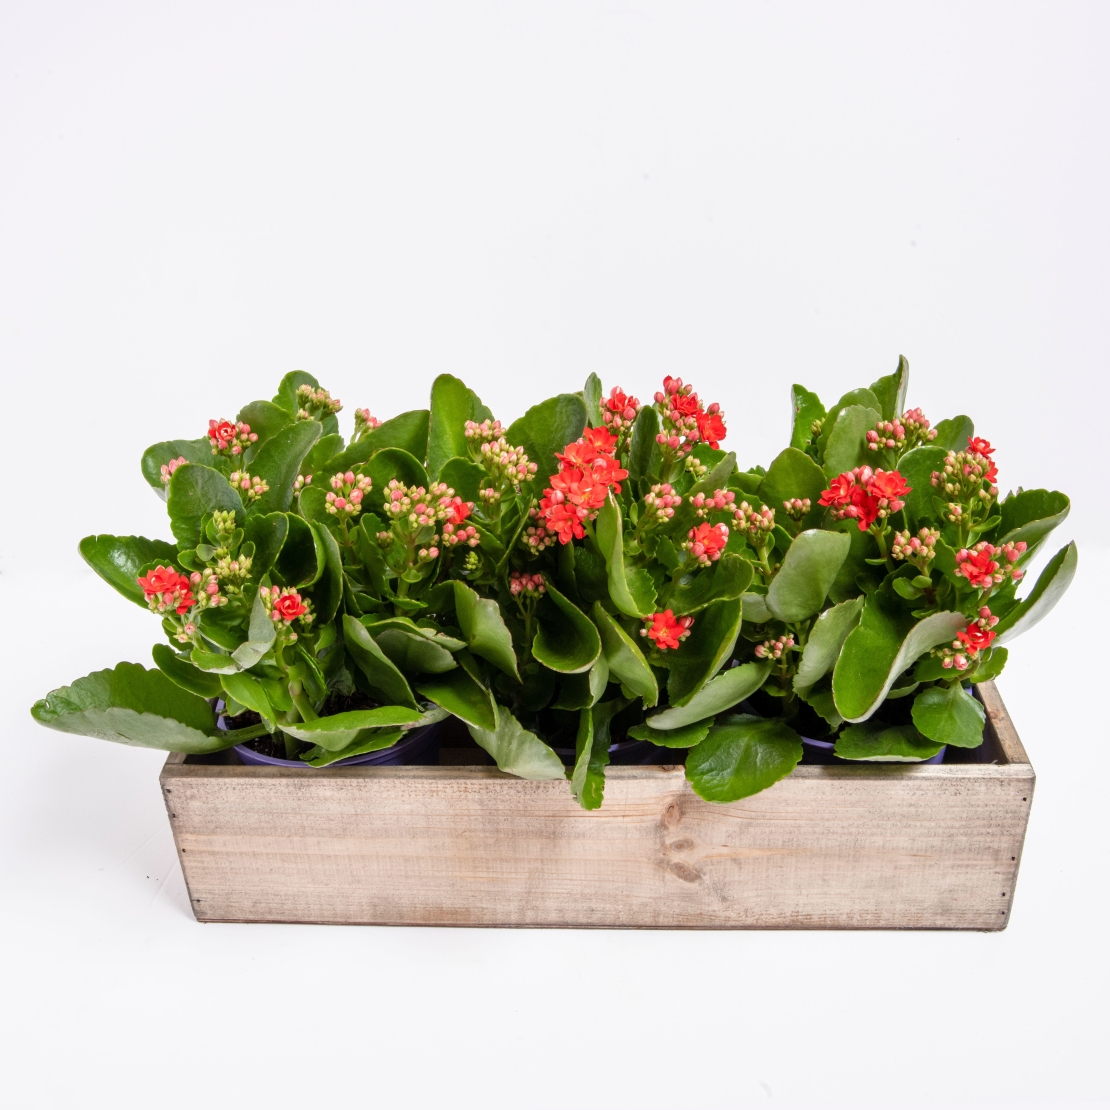 3 Kalanchoe Plants in a Wooden Box